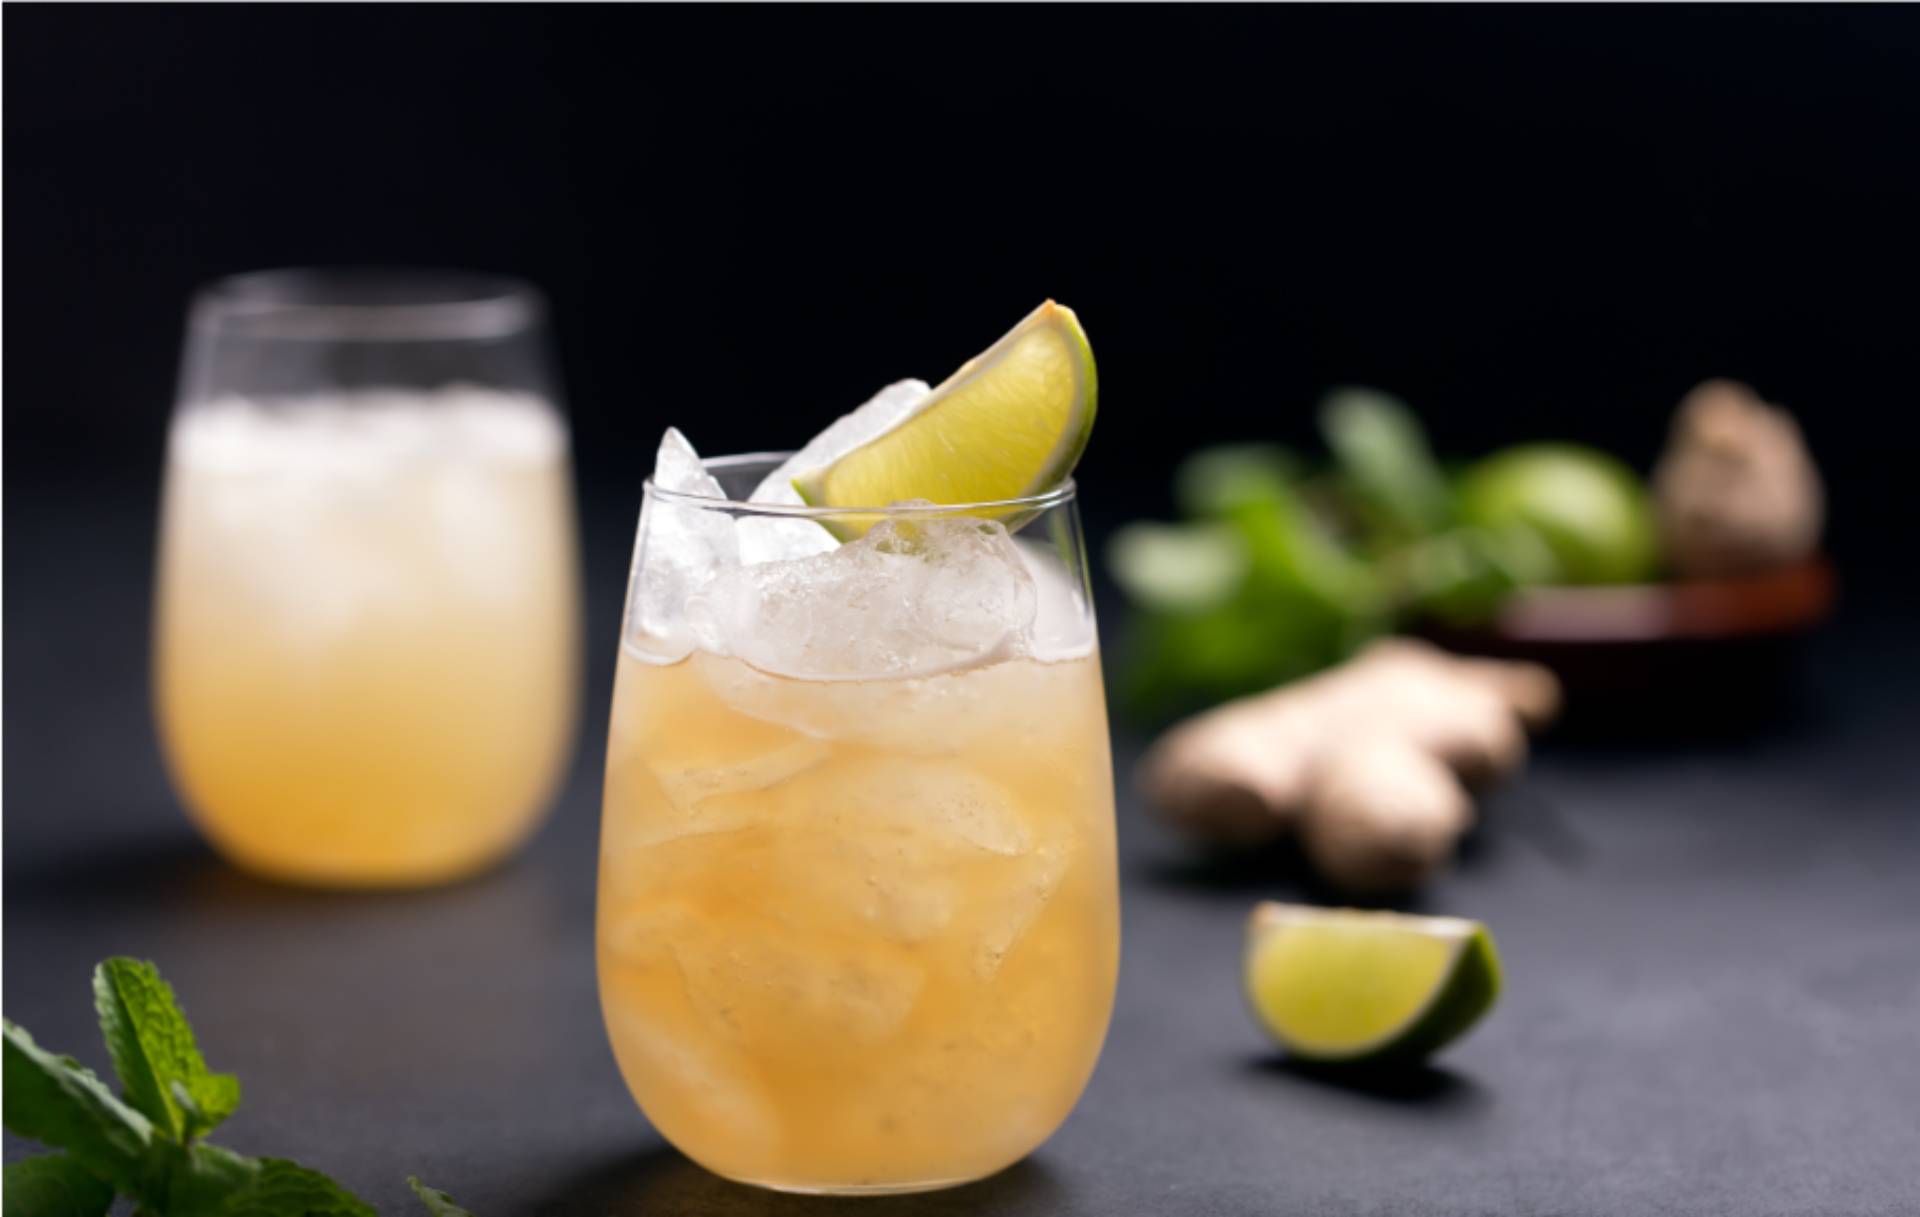 Spiced Rhubarb and Ginger Gin Cocktail Recipe